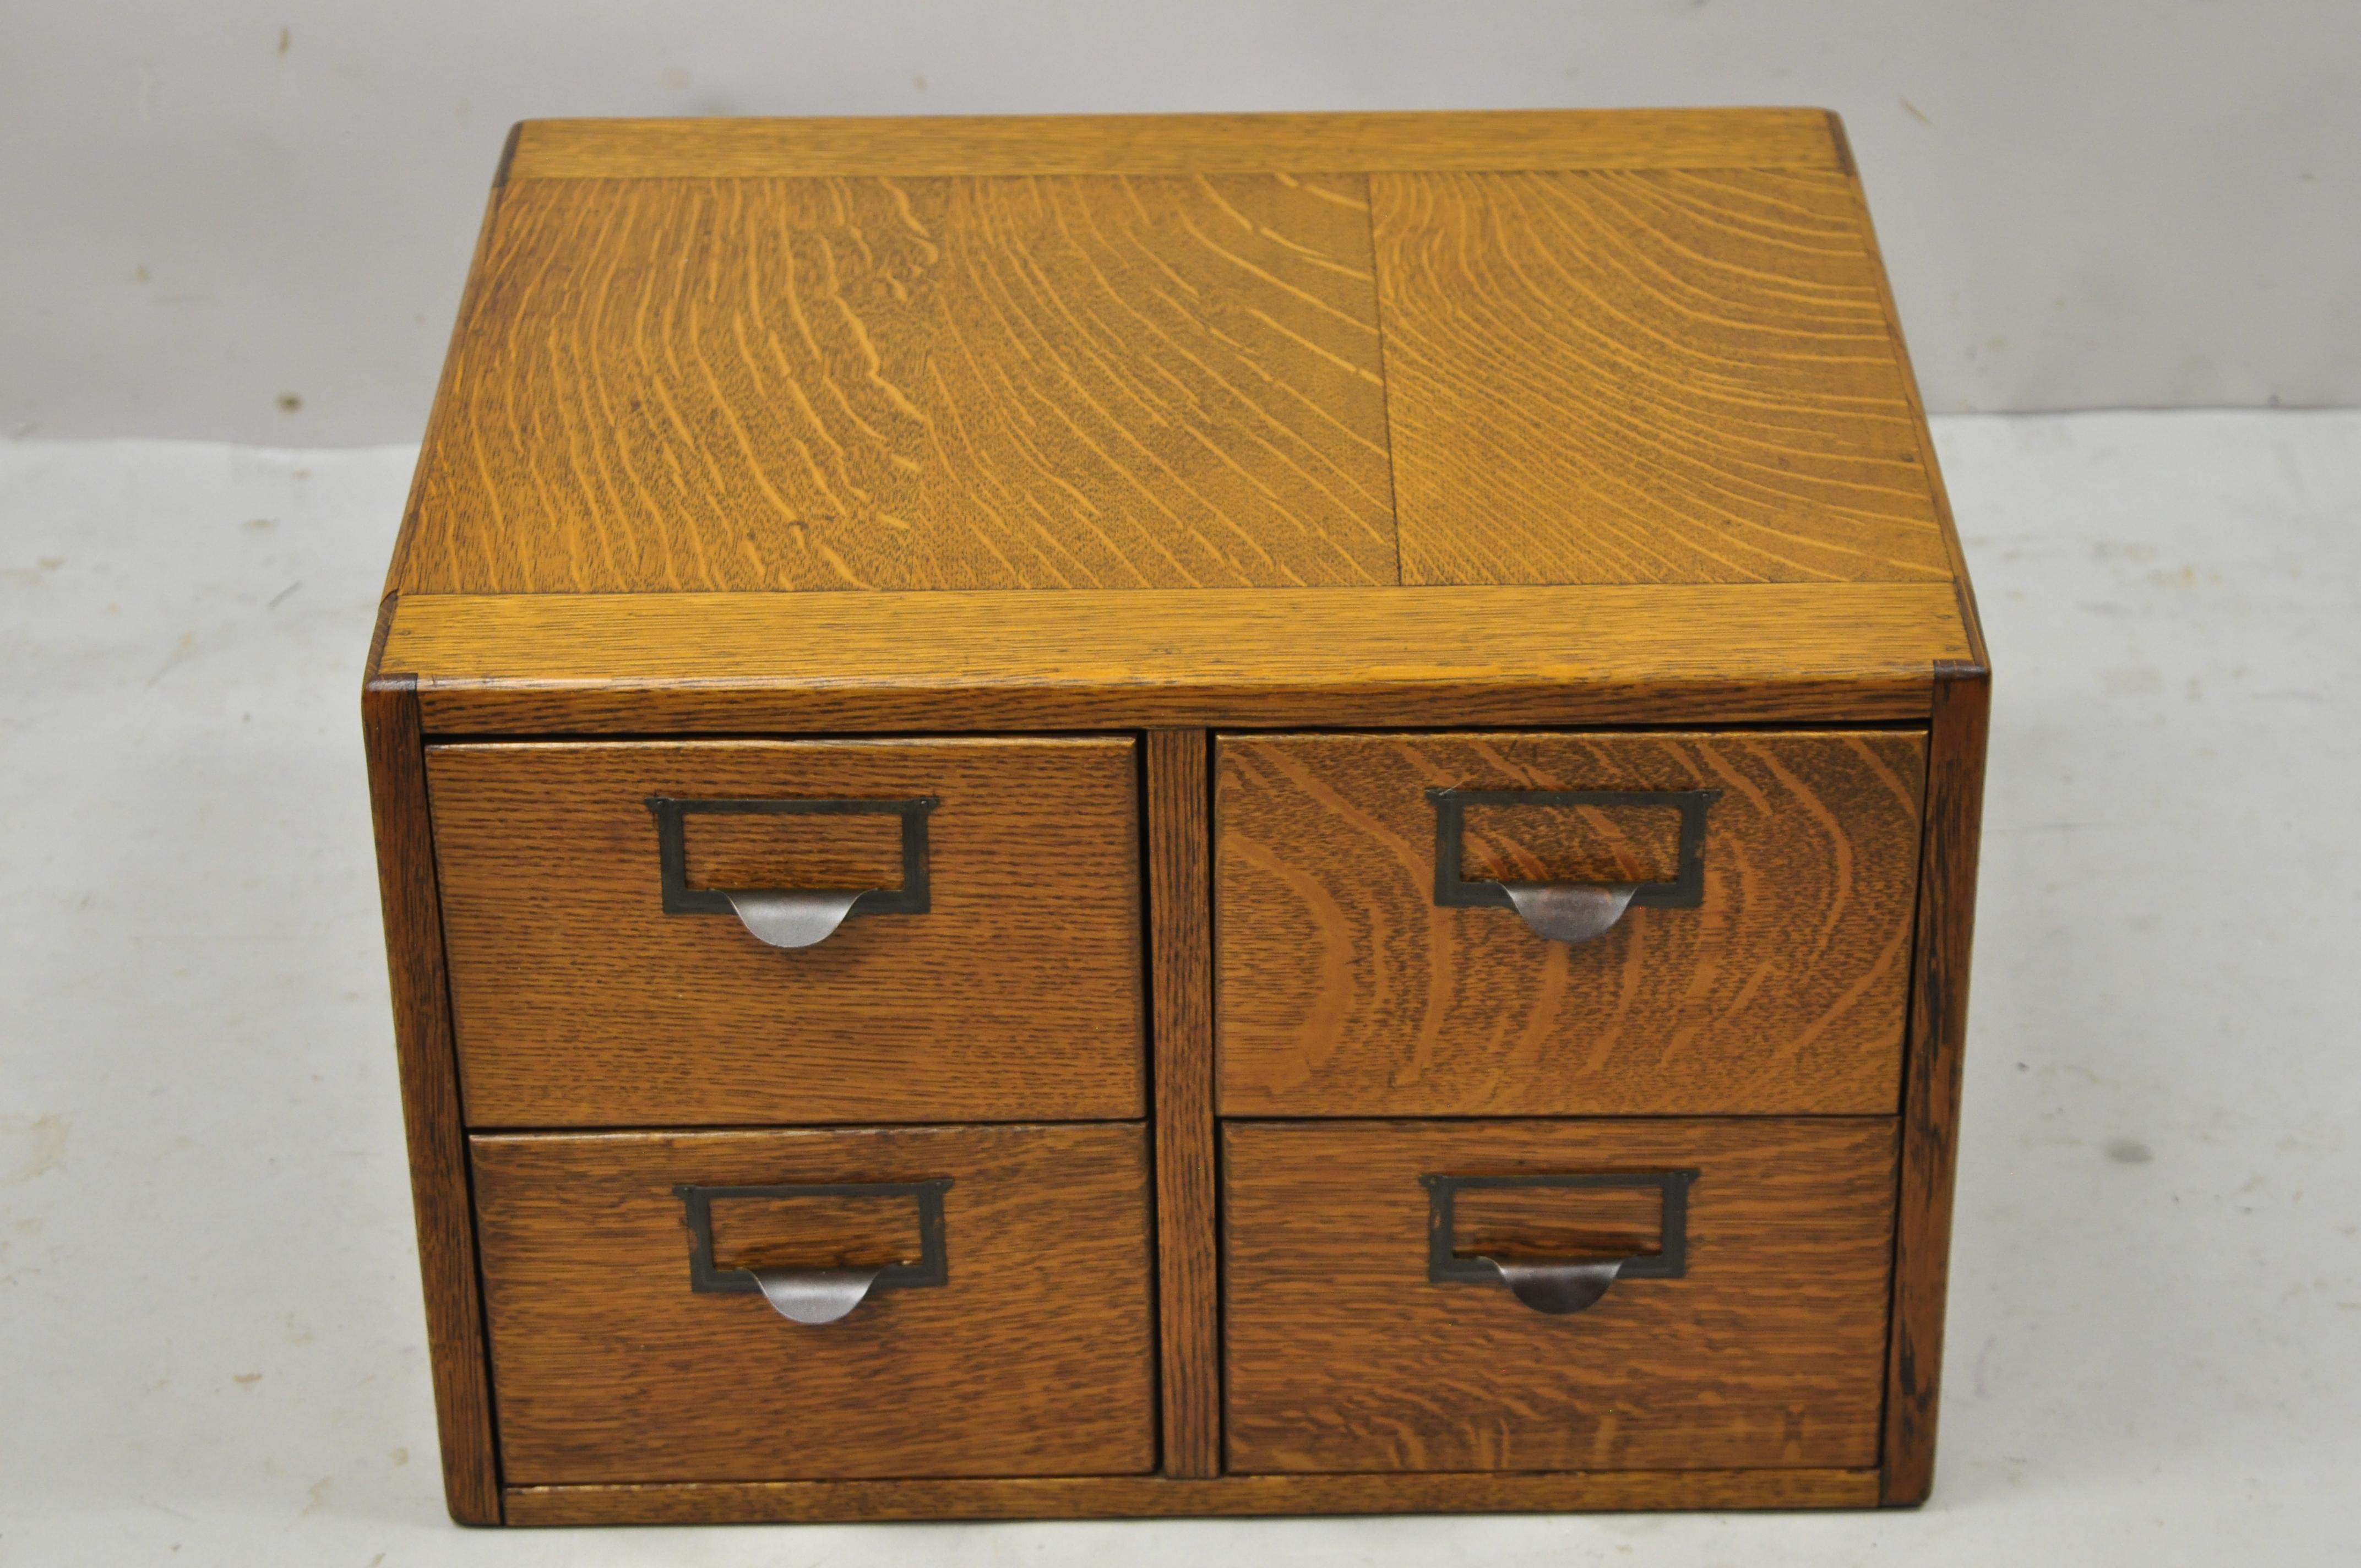 Antique golden mission tiger oak wood 4 drawer file card catalog cabinet. Item features solid wood construction, beautiful wood grain, 4 dovetailed drawers, very nice antique item, quality American craftsmanship, great style and form. Circa early